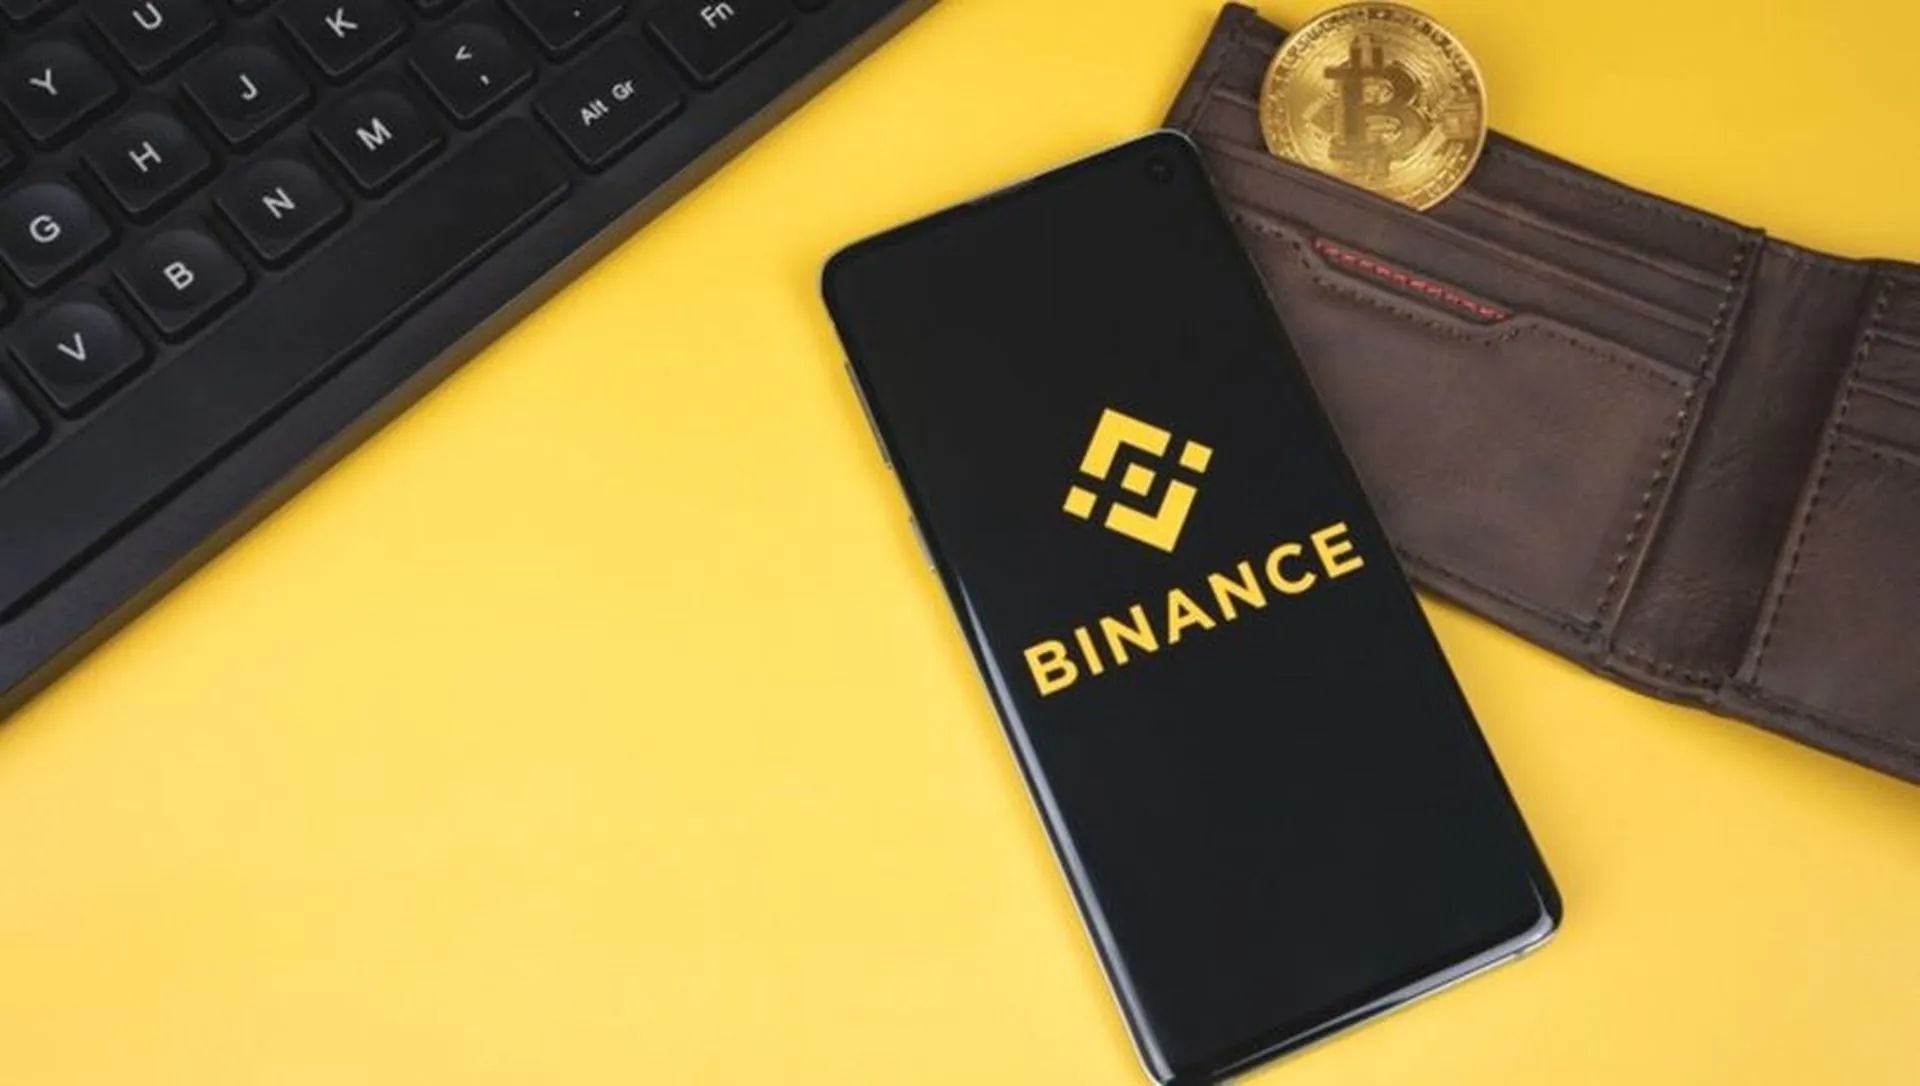 Today, we are here to show you the Binance Crypto WODL answers (September 12). If you find the correct cryptocurrency term in the Binance news, you might win...